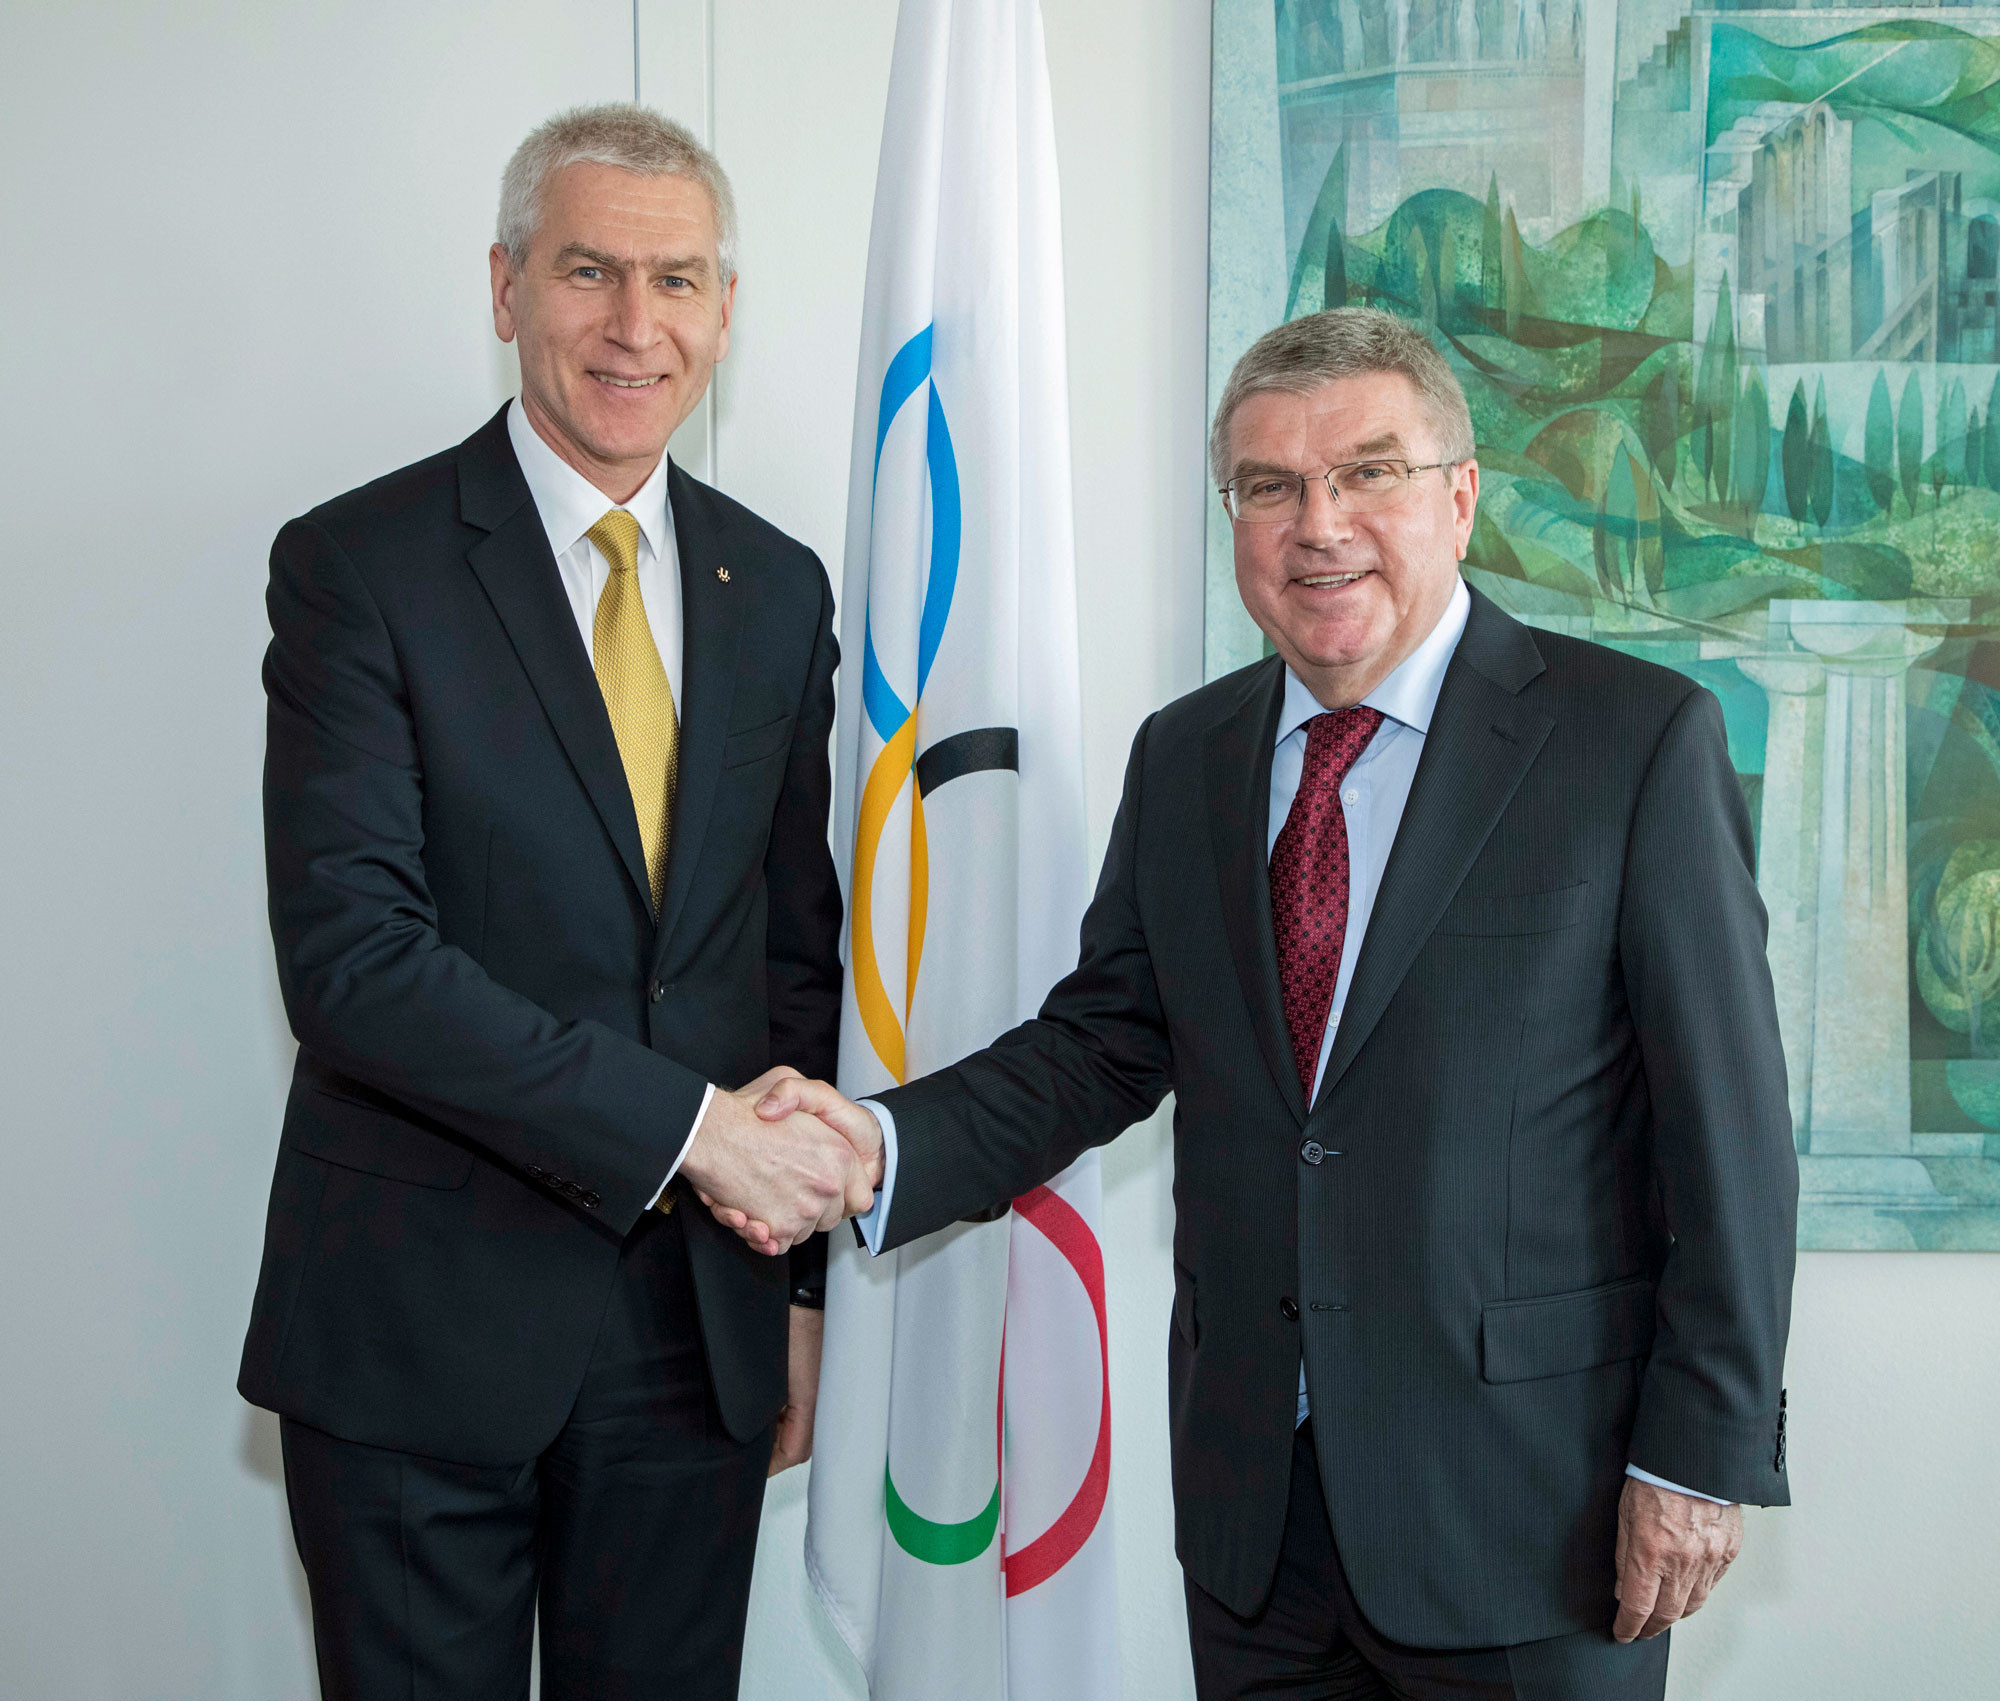 FISU President welcomes IOC Olympic Education Commission appointment